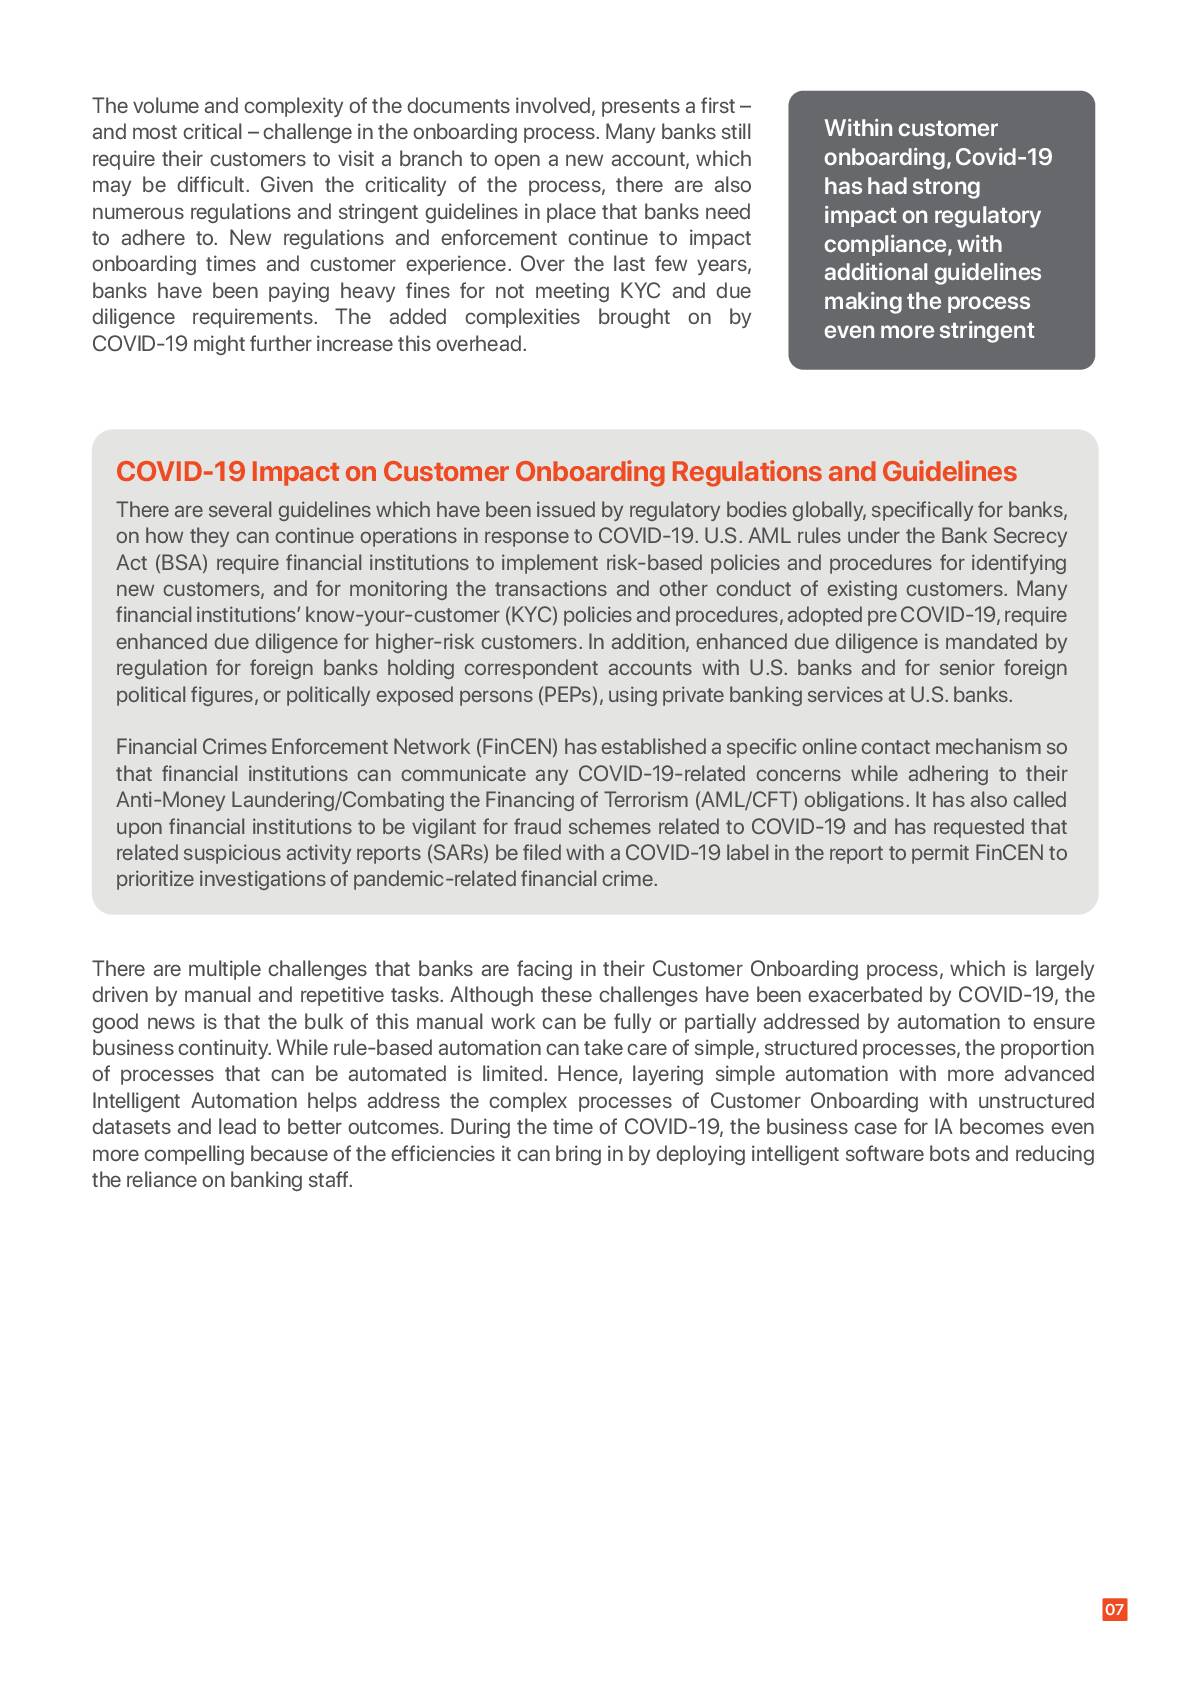 Reimagining Customer Onboarding For Banks Intelligent Automation In The Time Of Covid 197